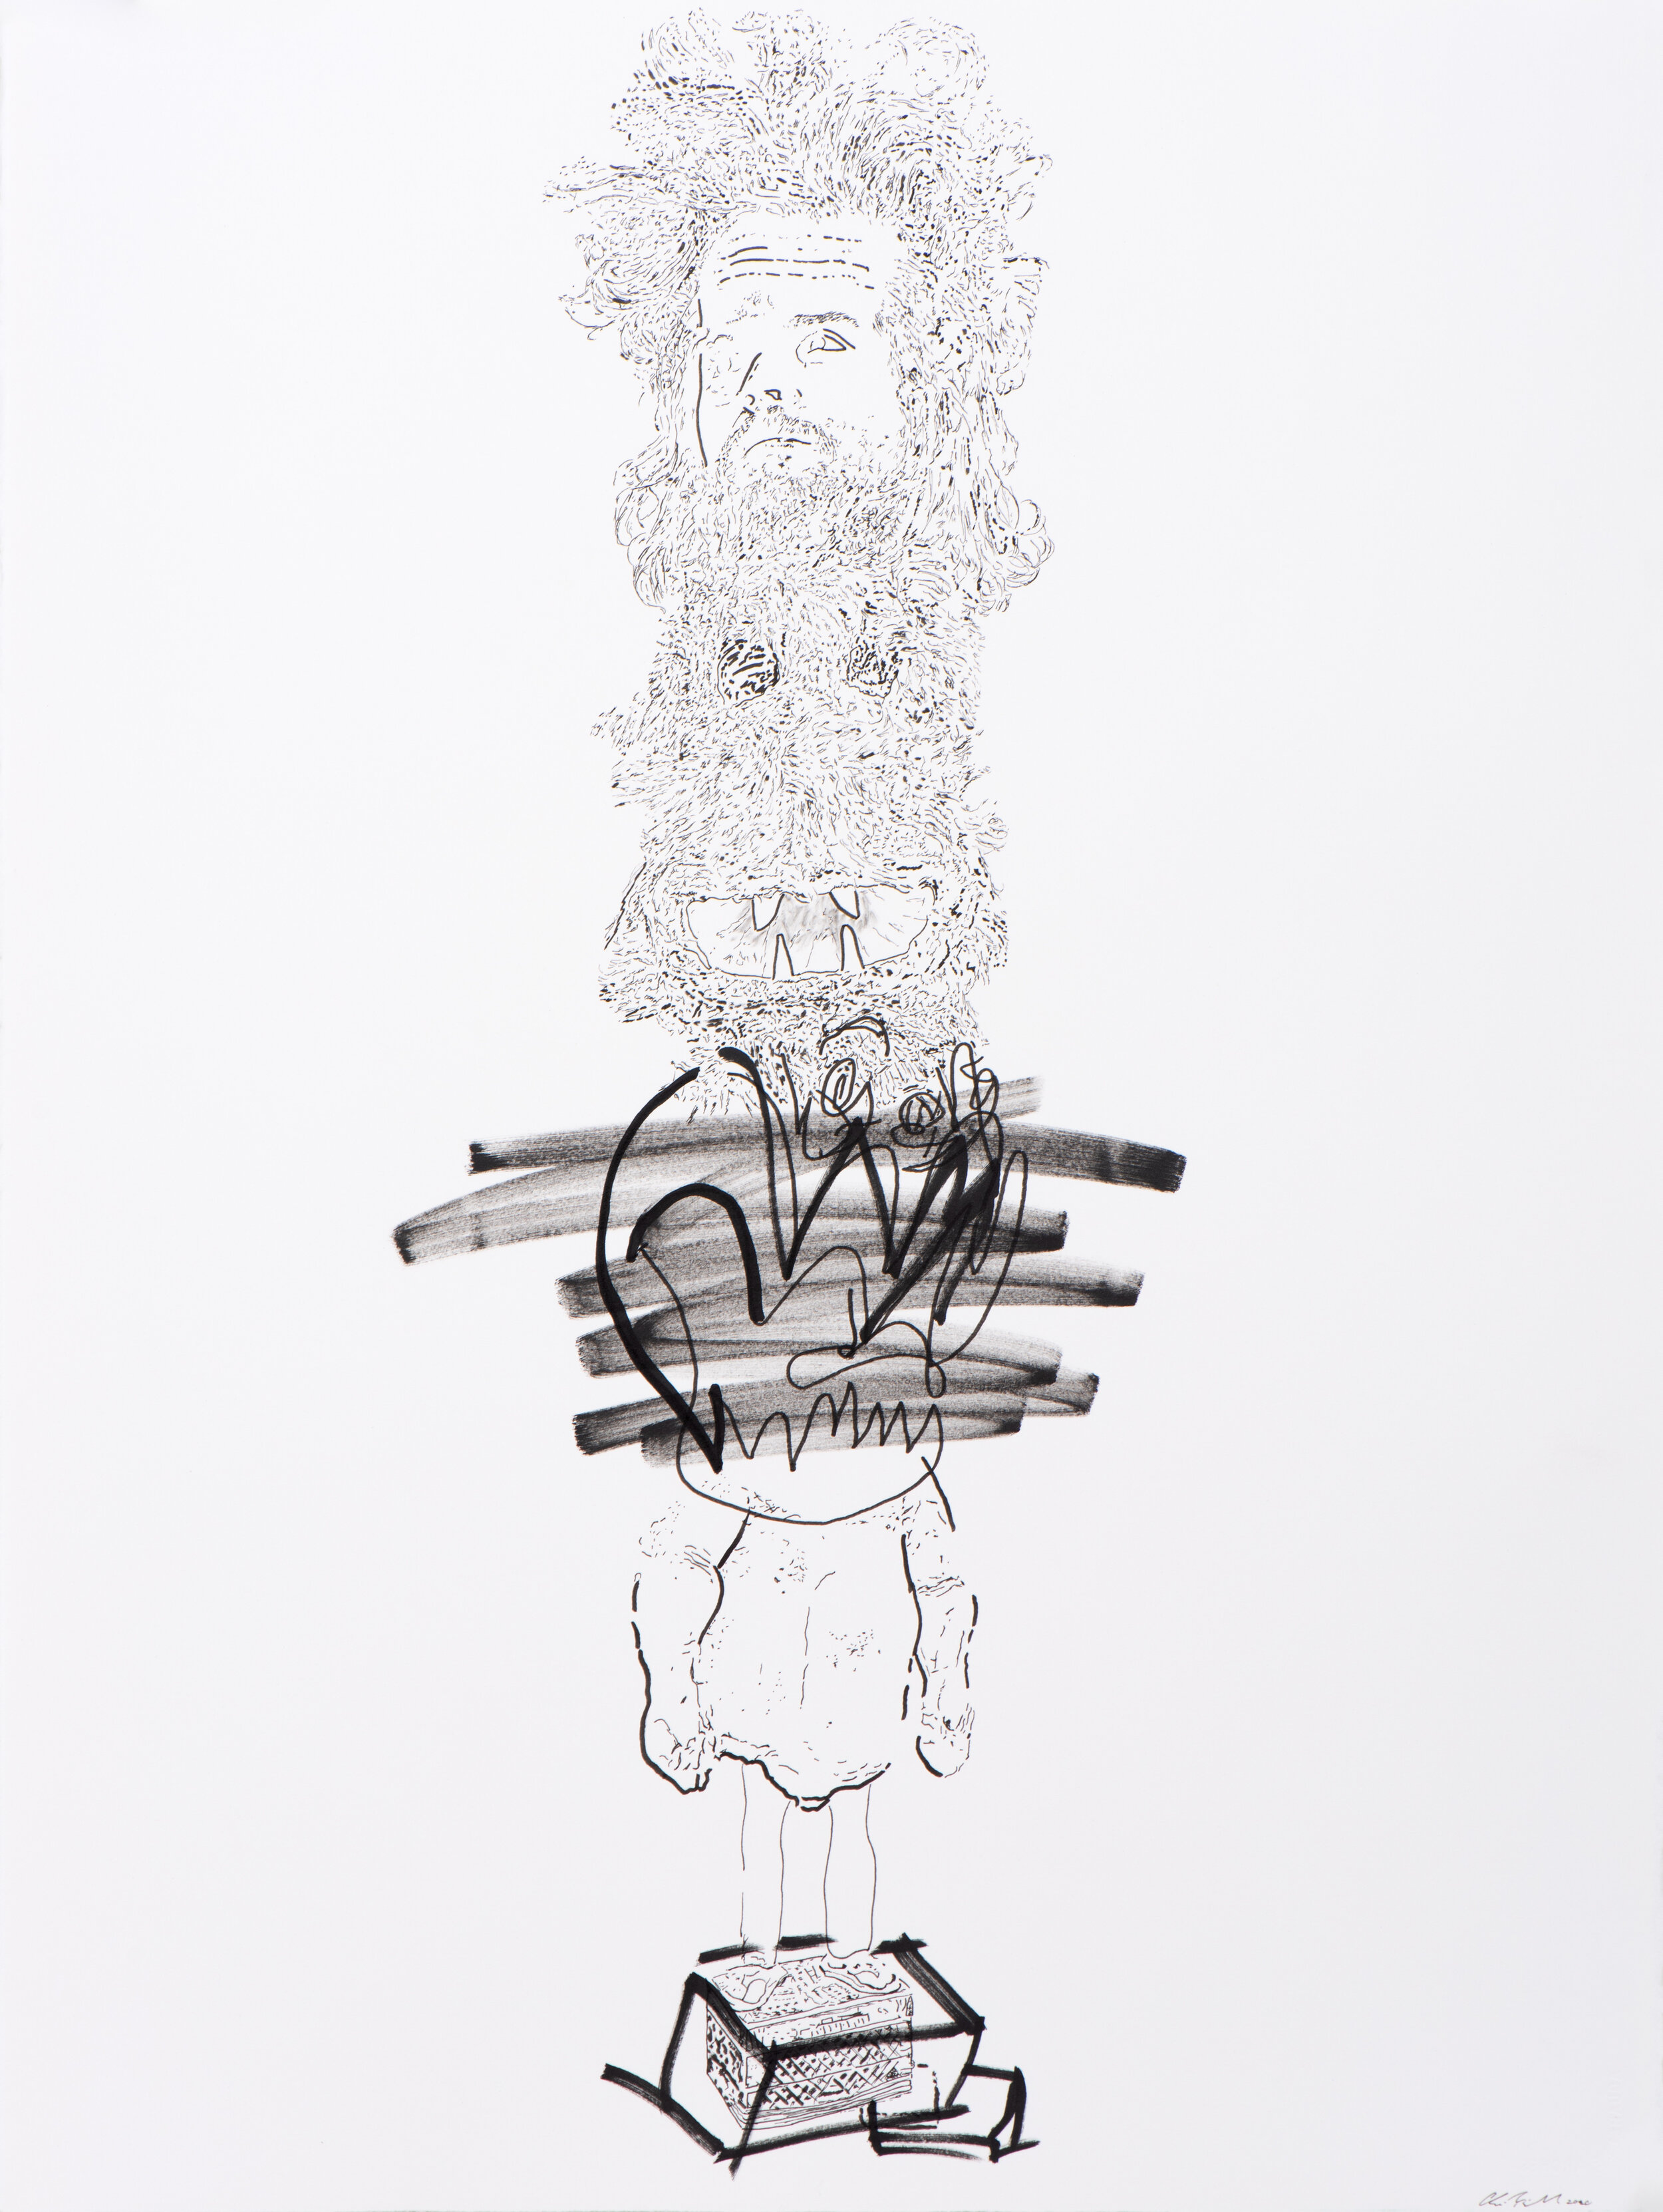   Totem II , 2020 Ink on paper 30 x 22 inches 